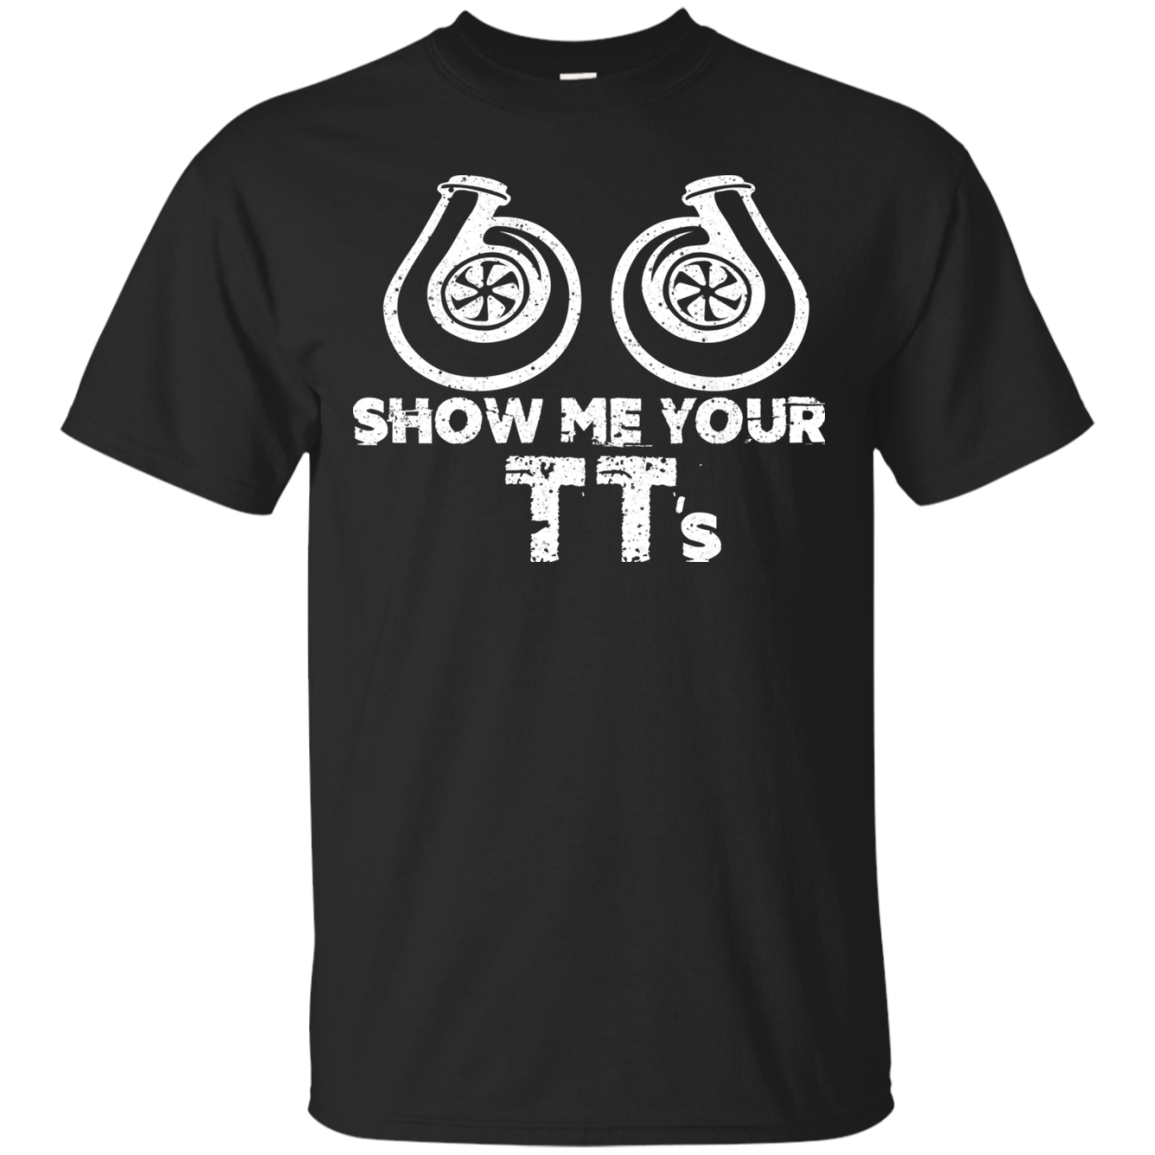 Show me your TT's Funny T-Shirt Twin Turbo Boost T-Shirt - Unisex Adult ...